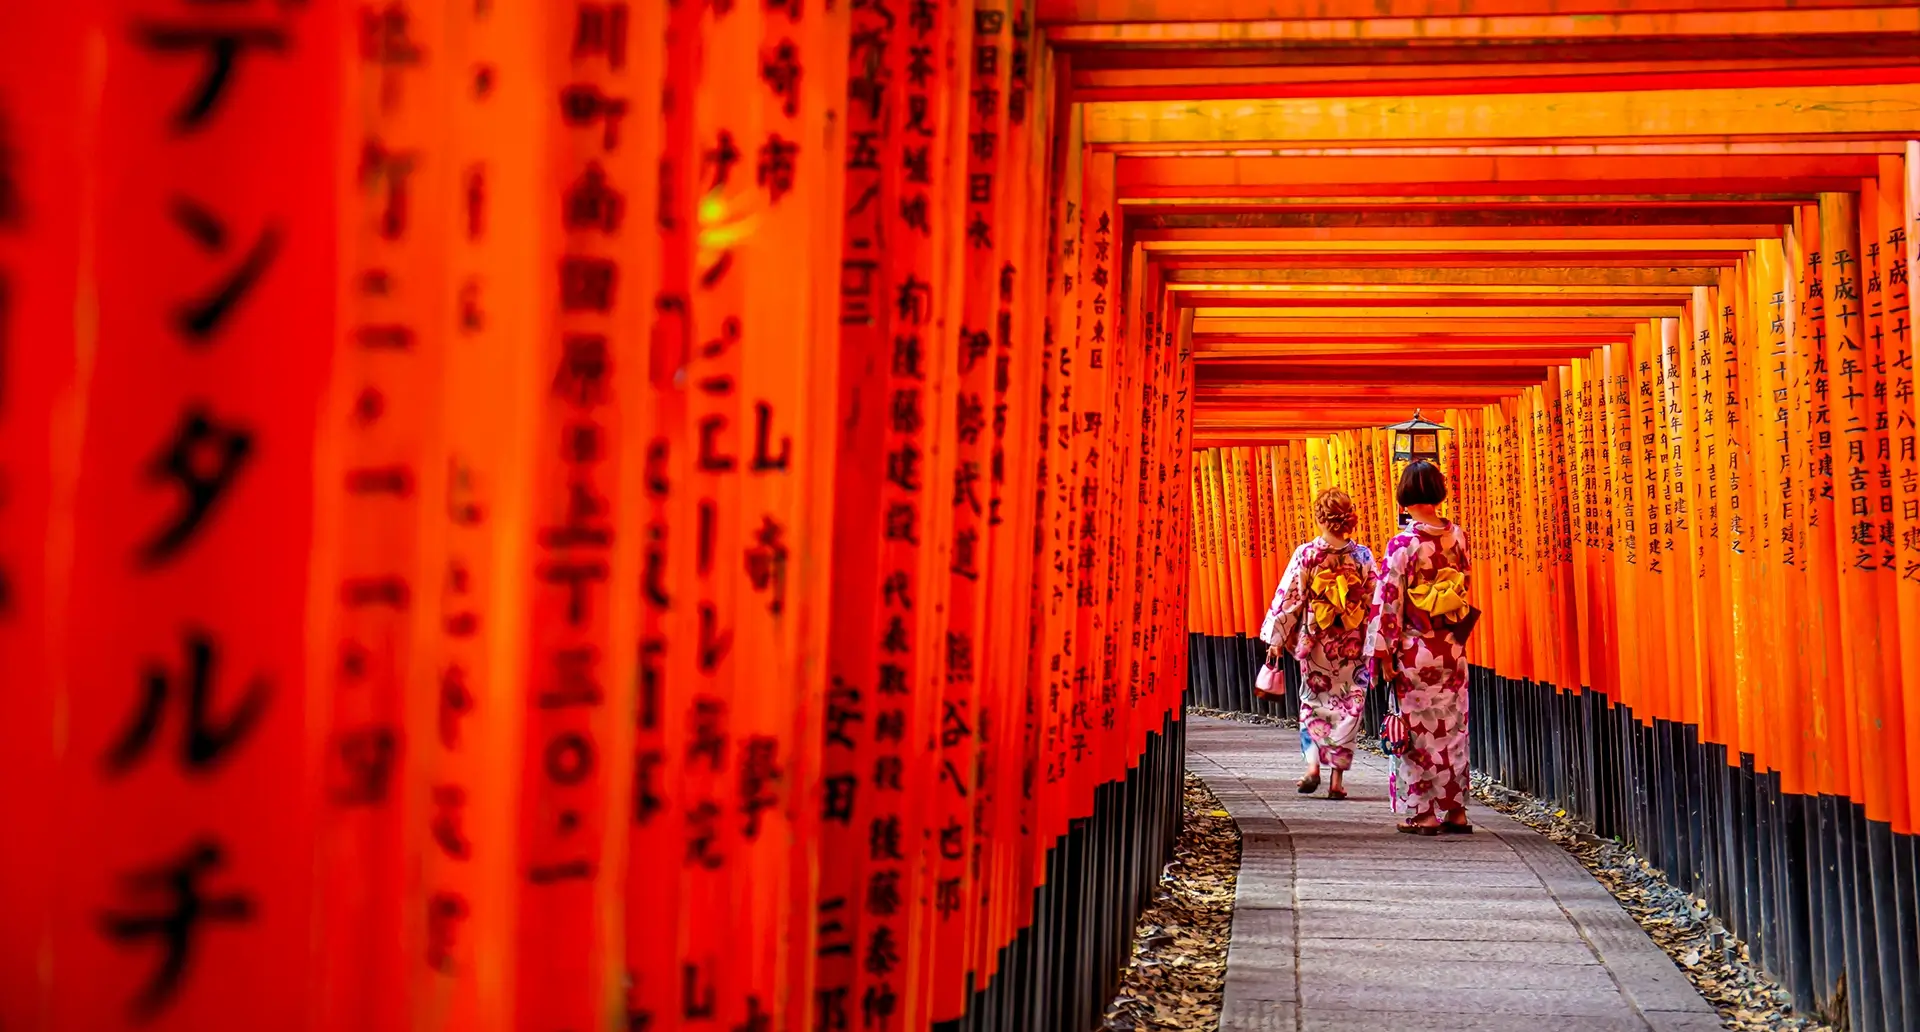 » Country Heritage Tours » Country Heritage Tours Japanese women wearing traditional clothing walking down a pathway with an archway bearing Japanese letter markings